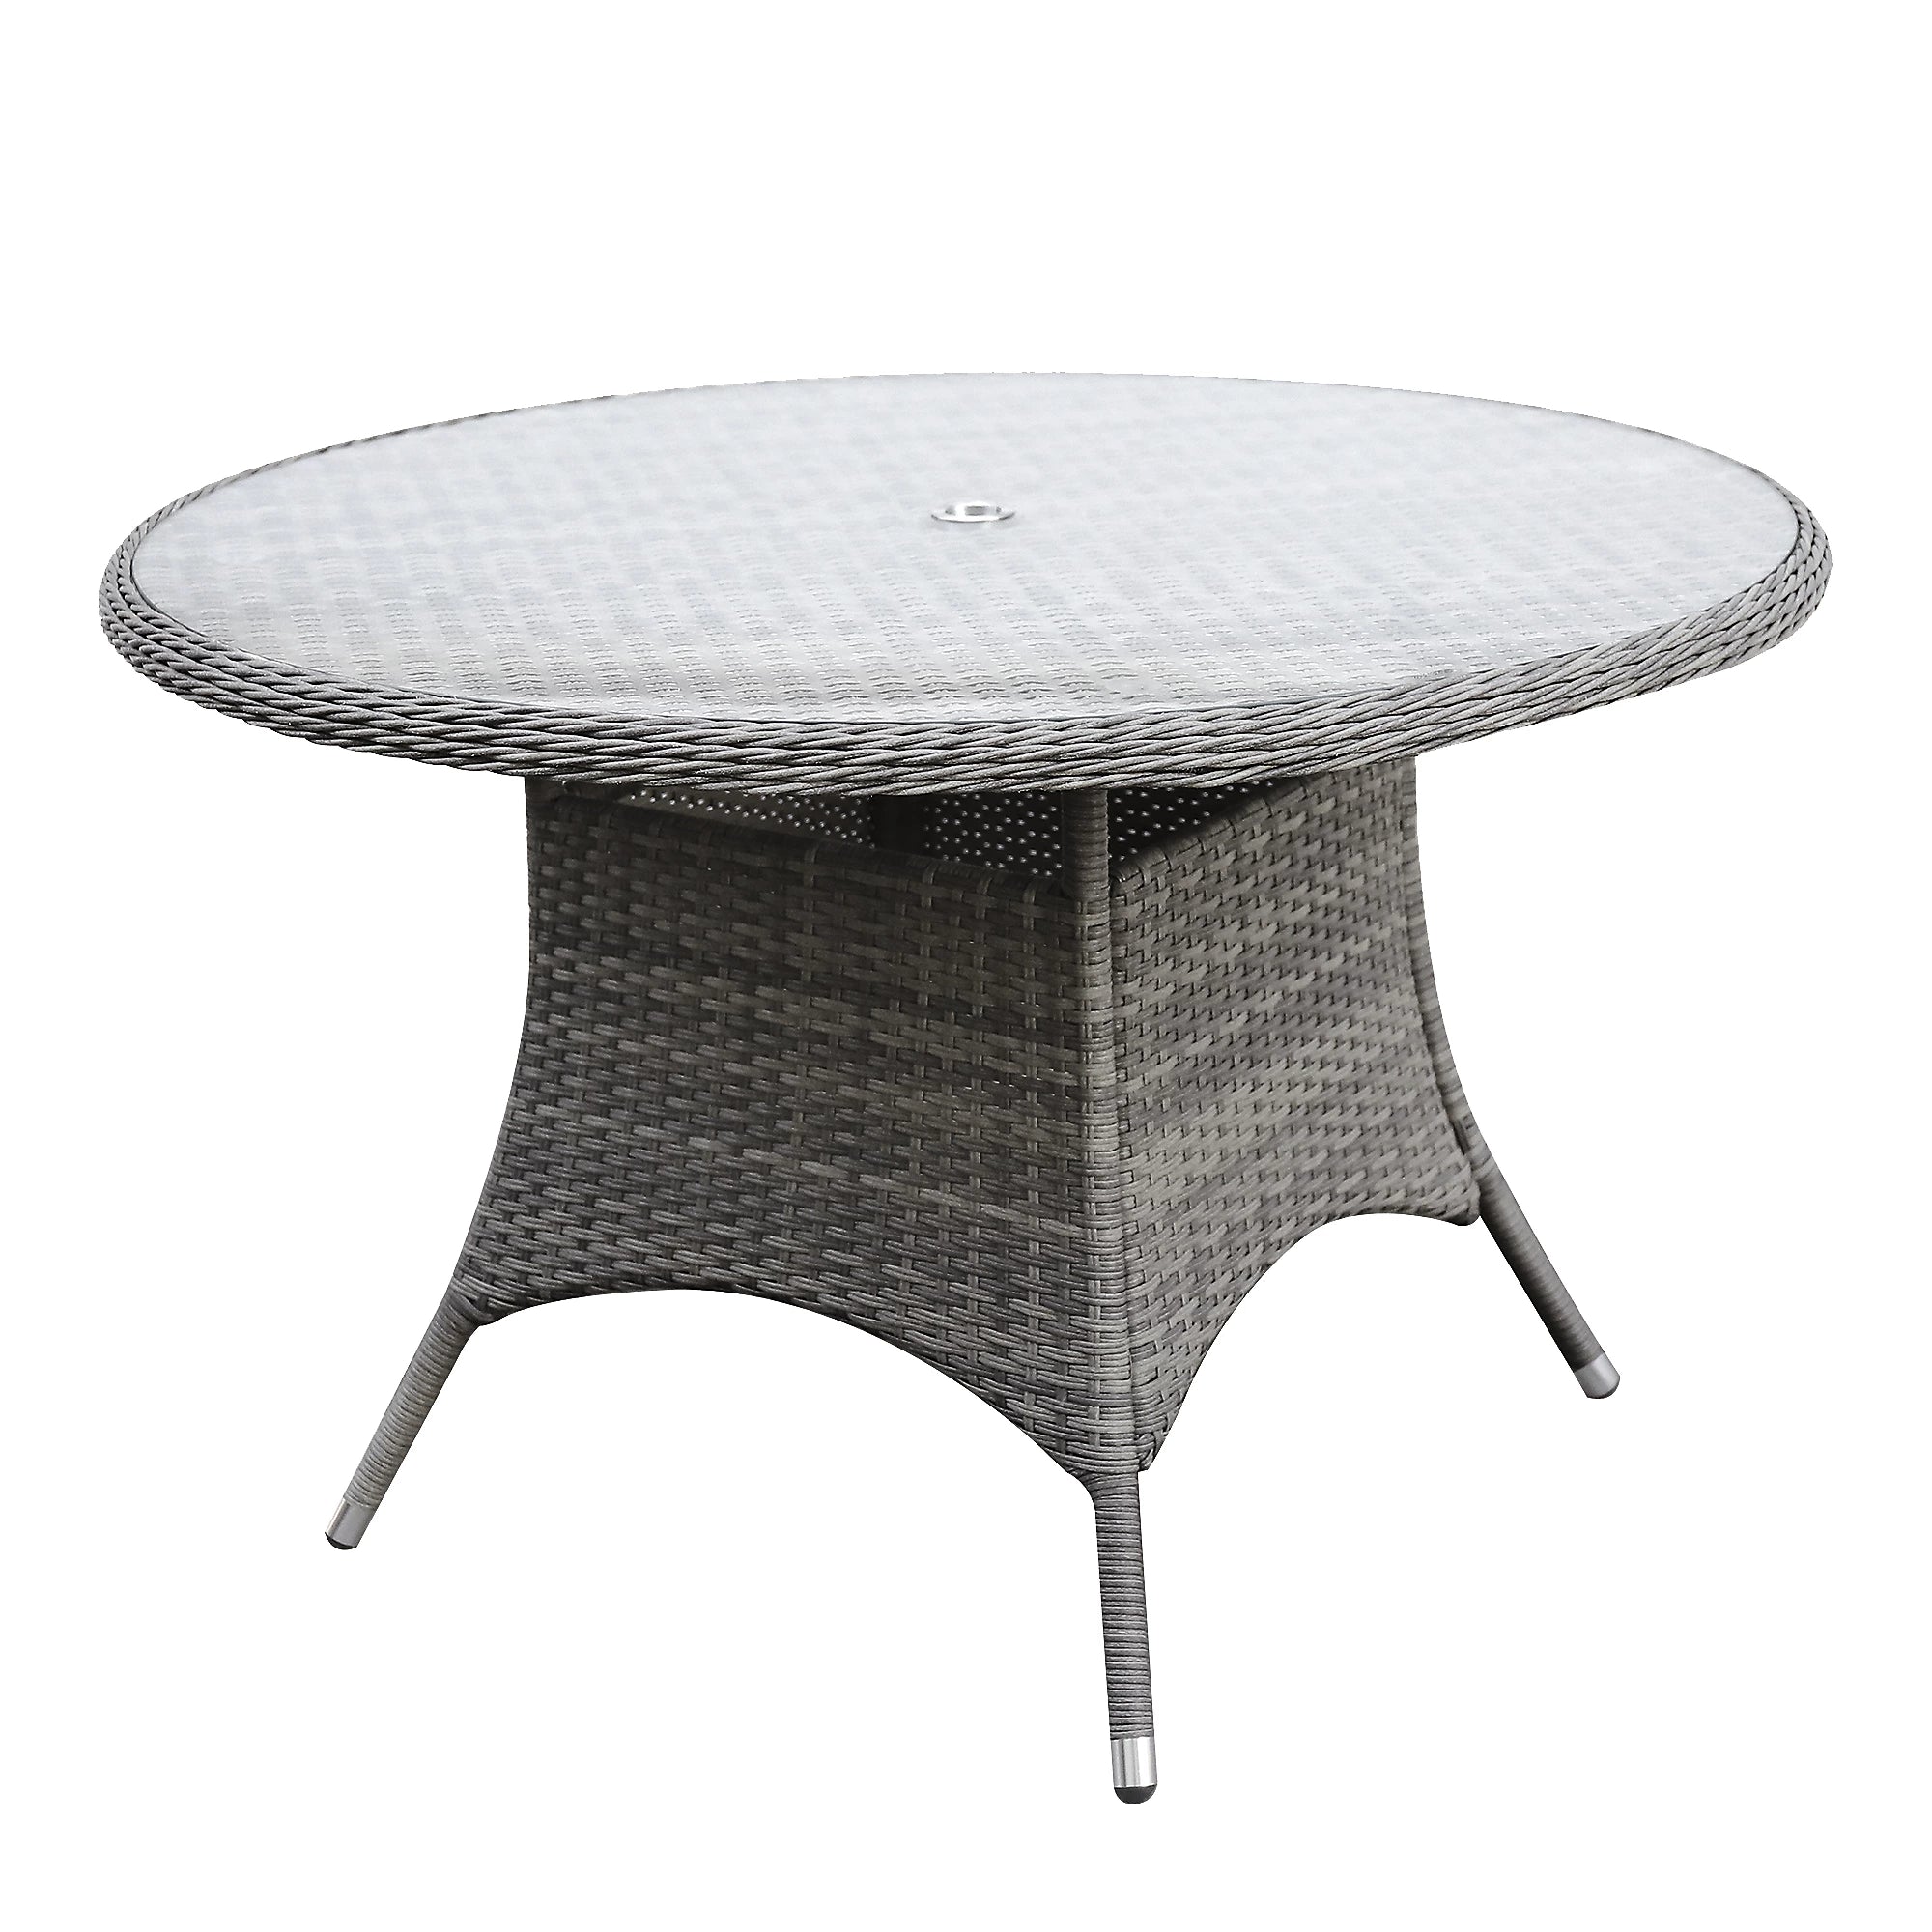 GoodHome Hamilton Rattan effect 4 seater Fixed Dining table, Rattan Garden Table 